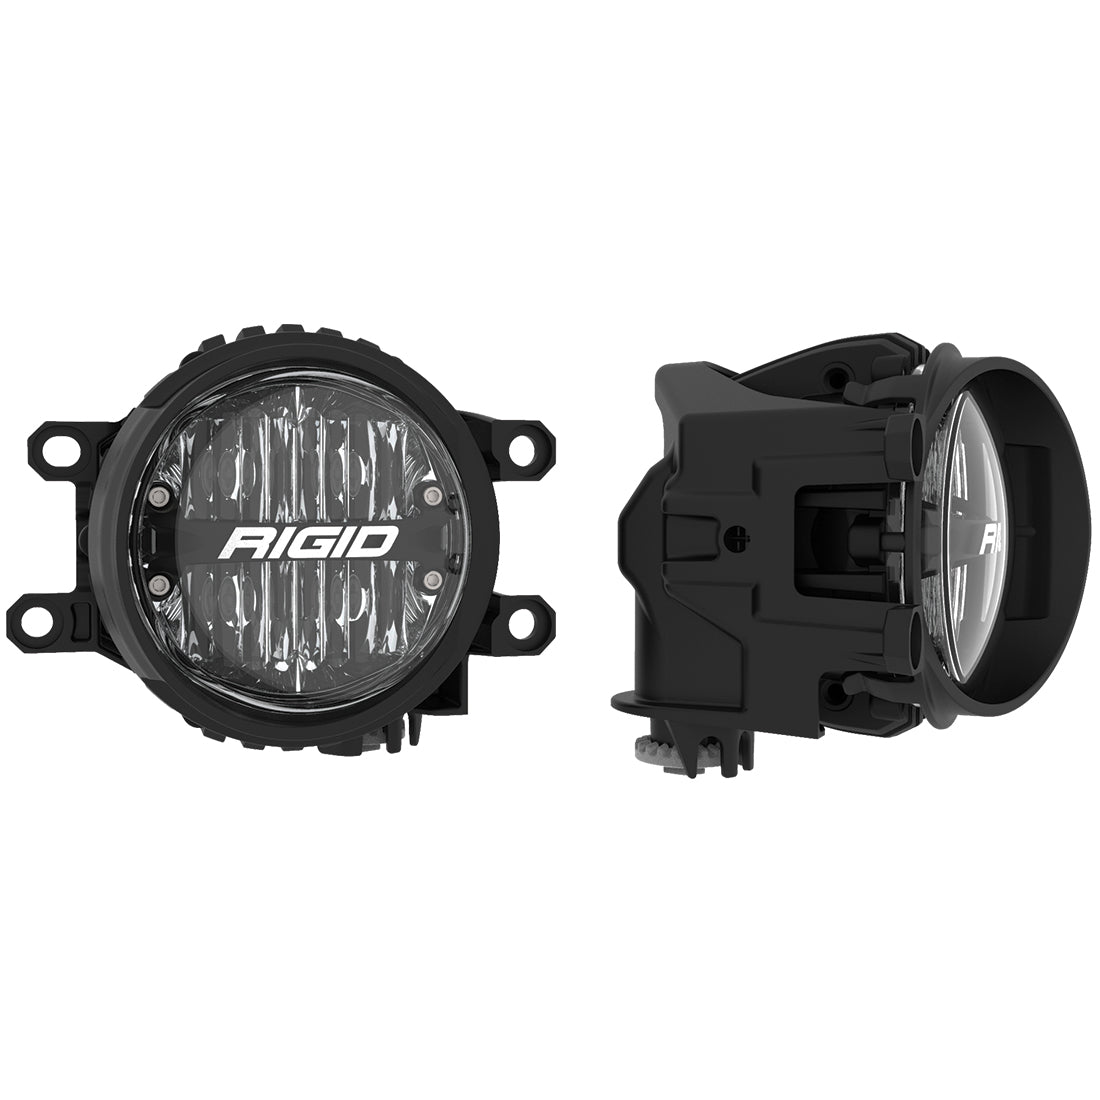 Rigid Industries Toyota Fog Mount Kit For 10-20 Tundra/4Runner 16-20 Tacoma With 1 Set 360-Series 4.0 Inch SAE White Lights RIGID Industries 37116